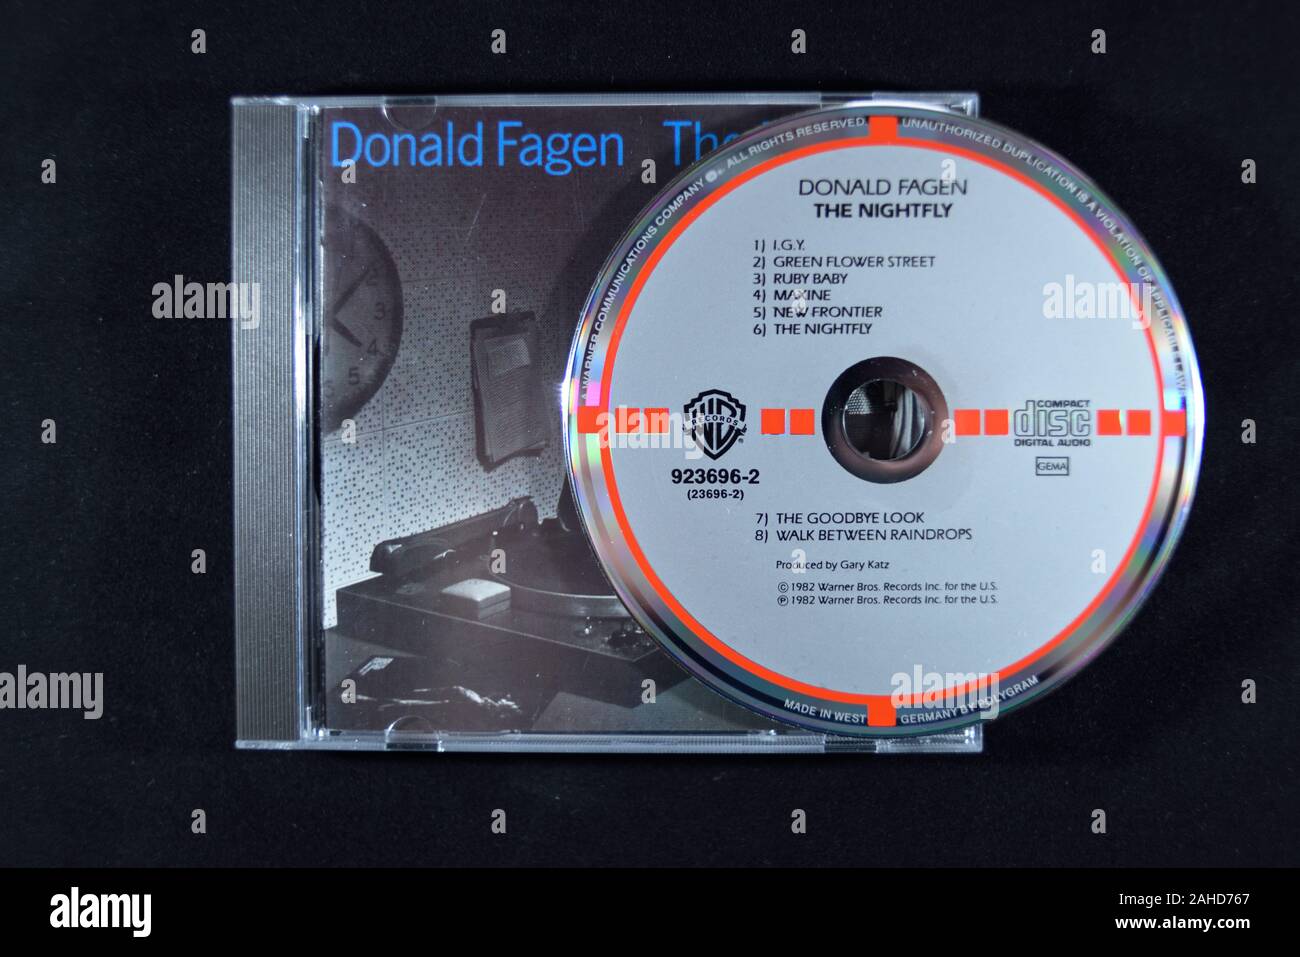 Rare Target CDs From the 1980's Music Era. Donald Fagen, The Nightfly. Stock Photo